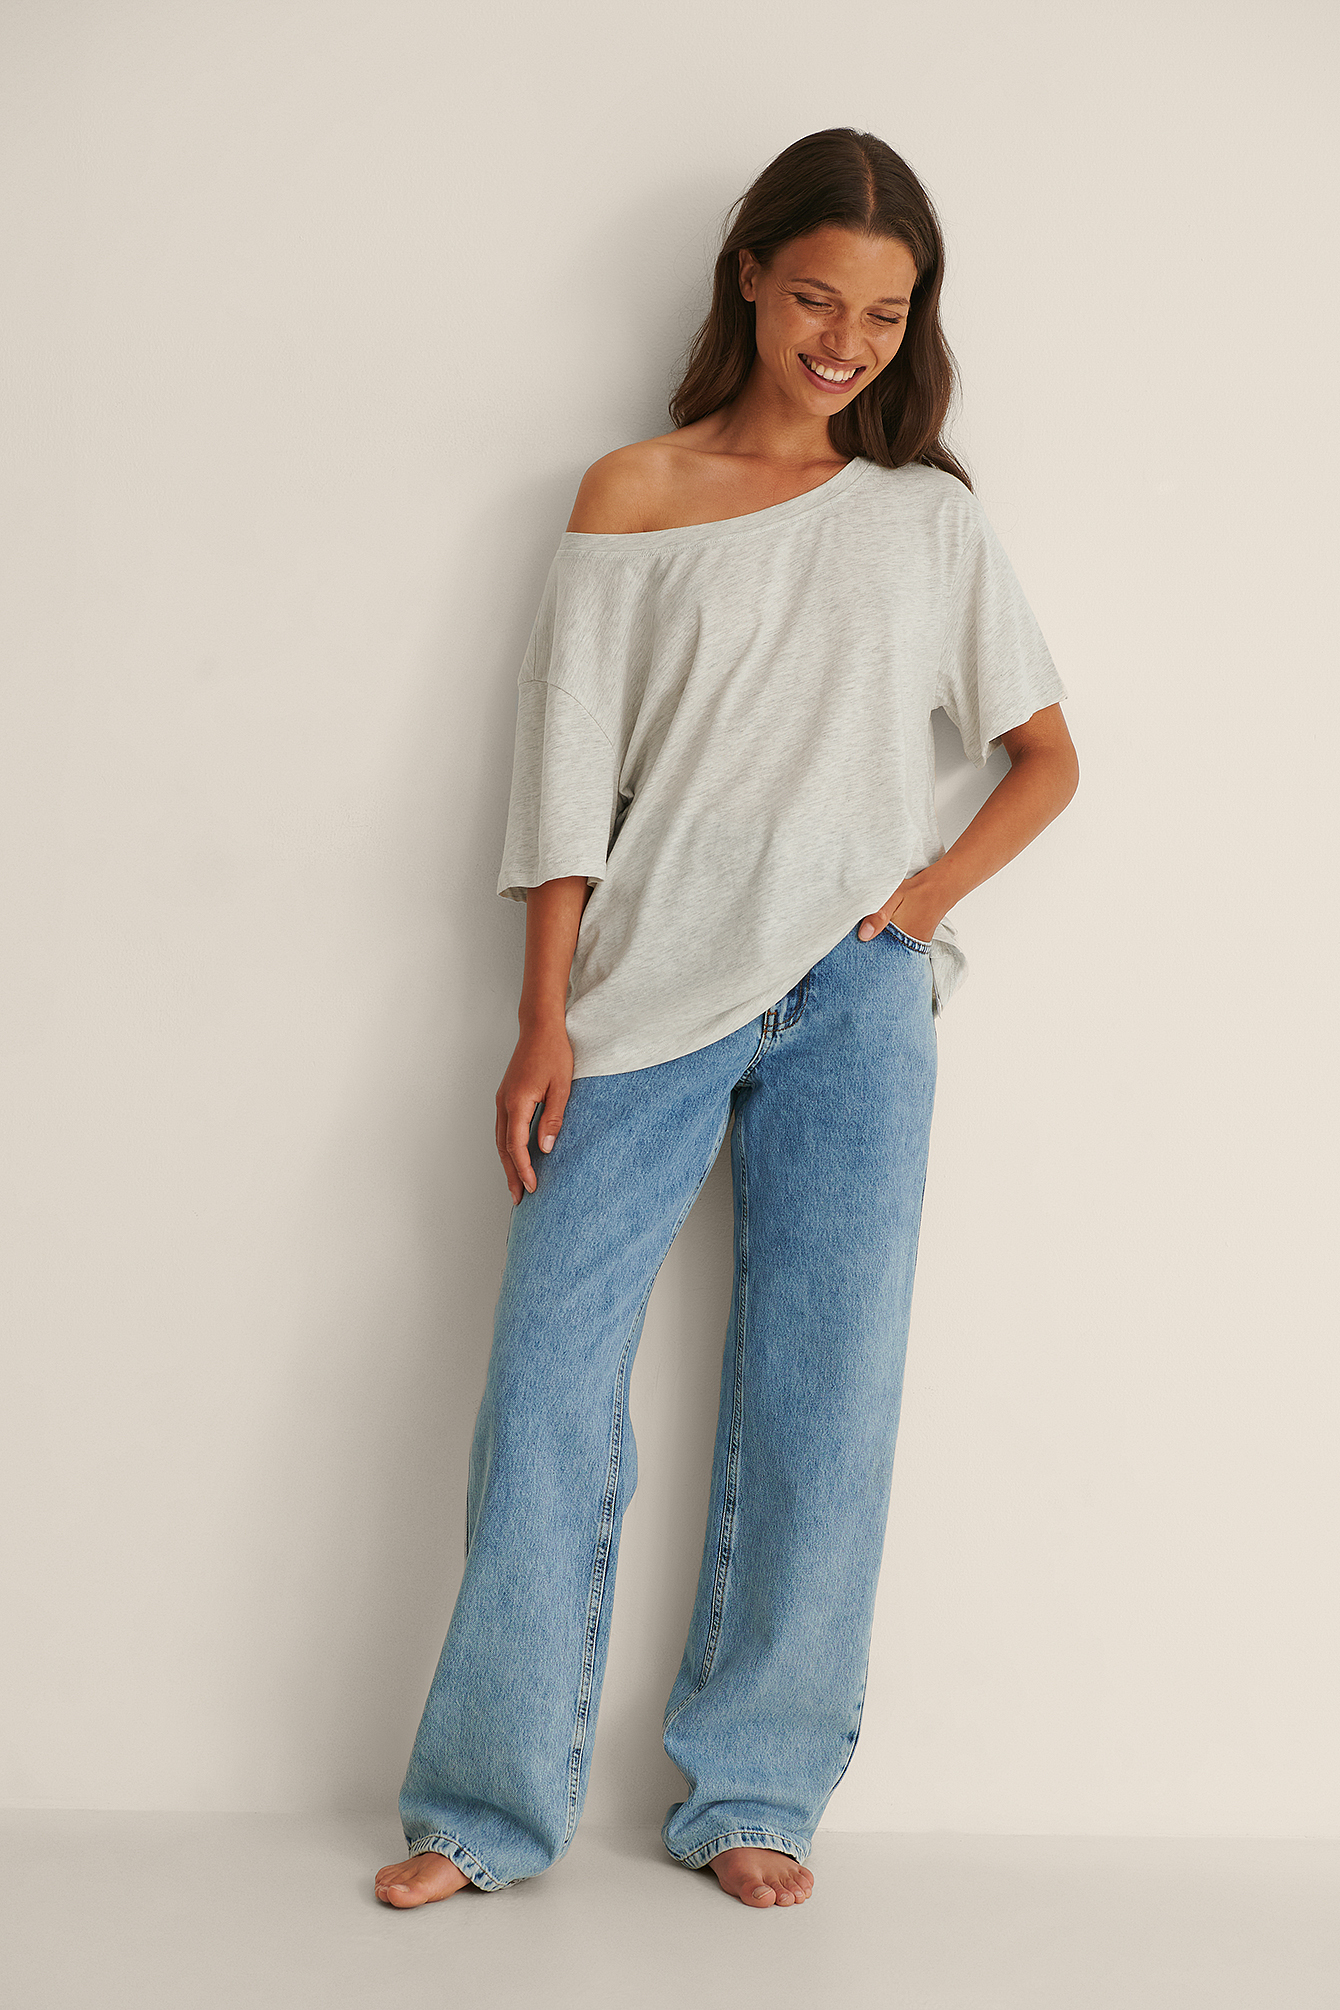 Organic One Shoulder T-Shirt Outfit.